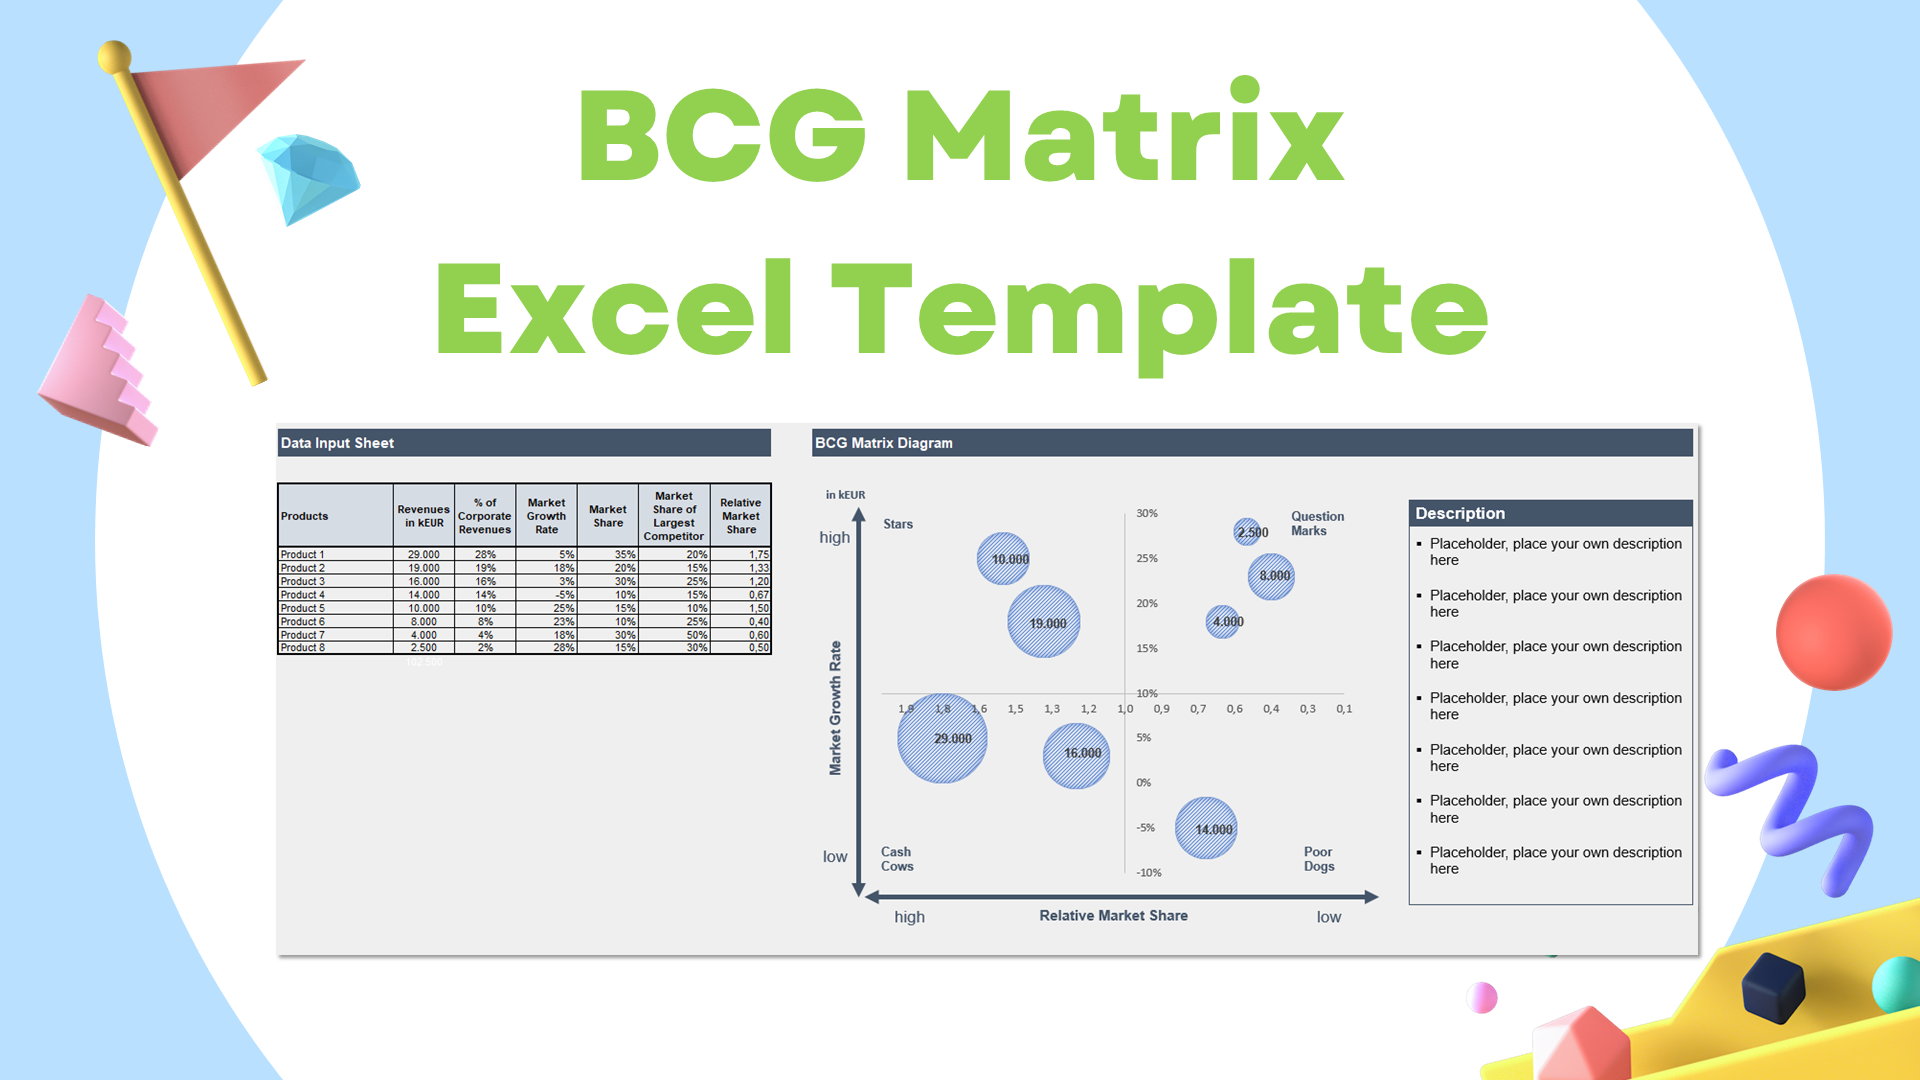 BCG Matrix: Introduction and Excel Template